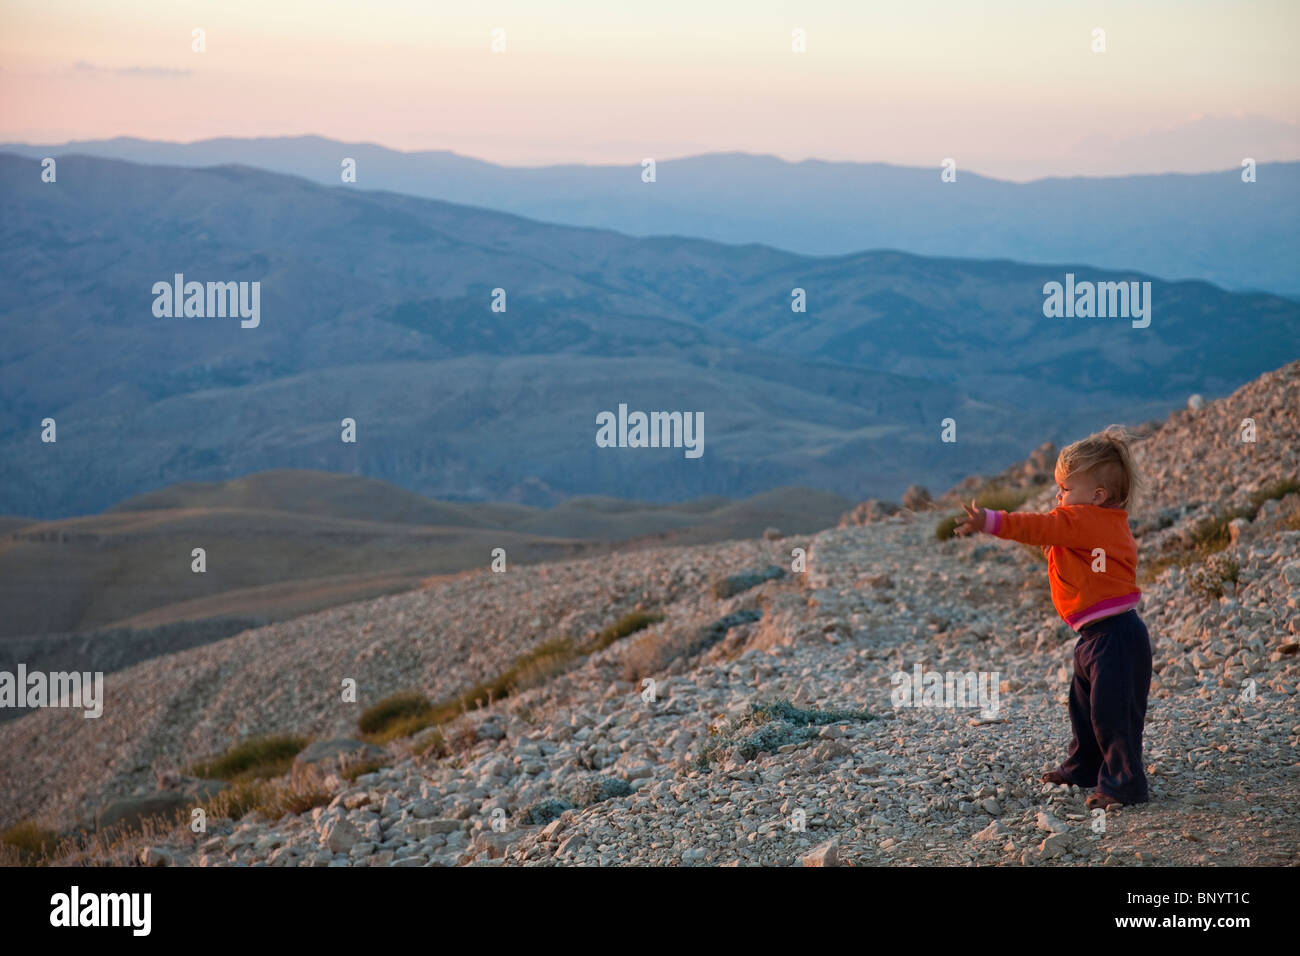 Small tourist reaching out at Mount Nimrut in Turkey Stock Photo